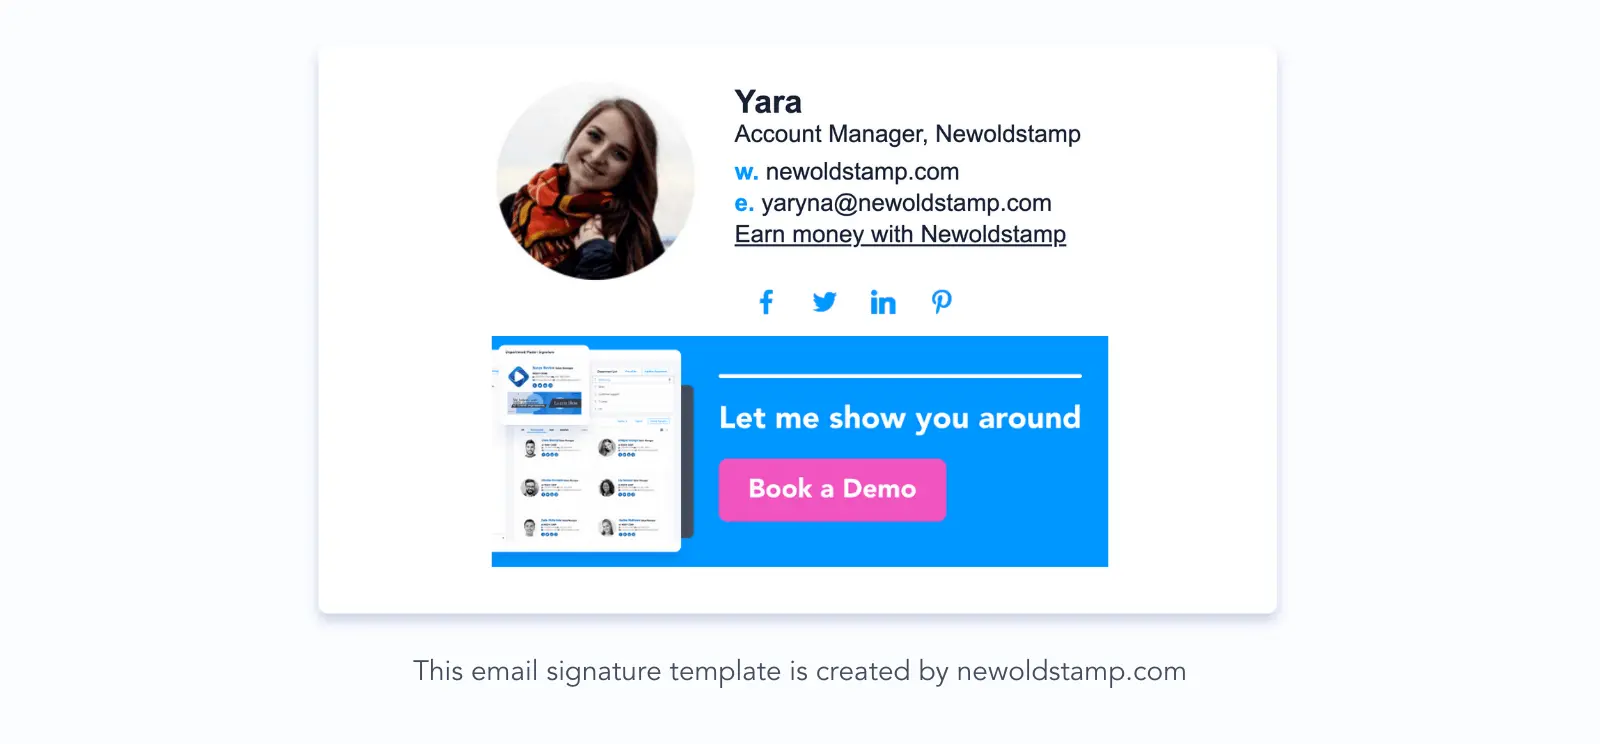 Example of email signature banner for Action stage